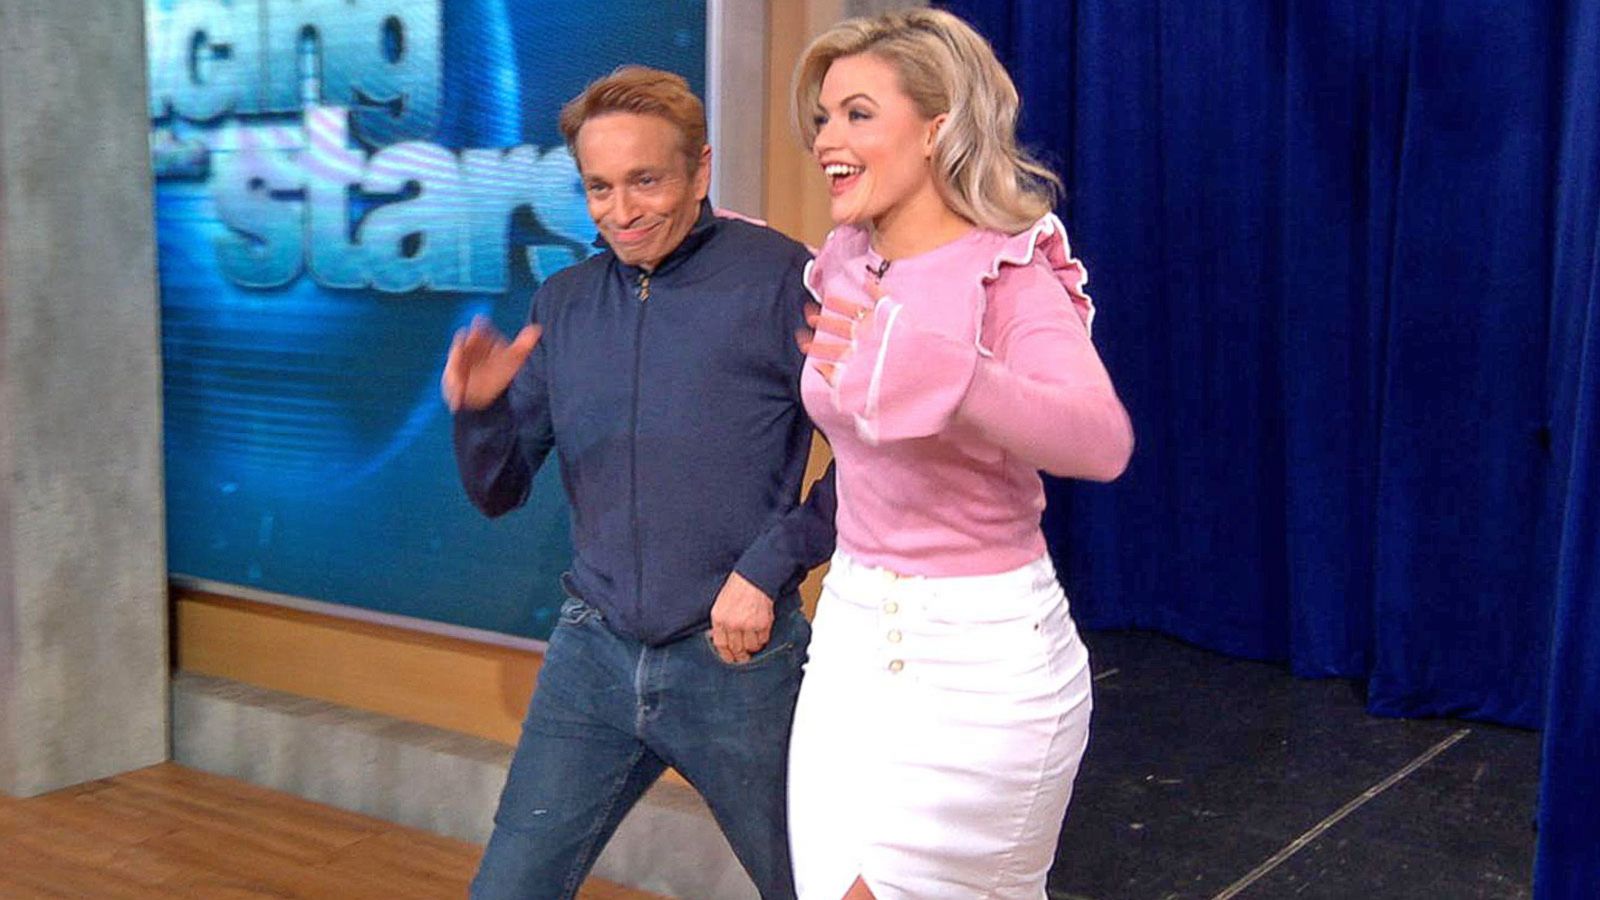 Chris Kattan speaks out after 'Dancing With the Stars' elimination